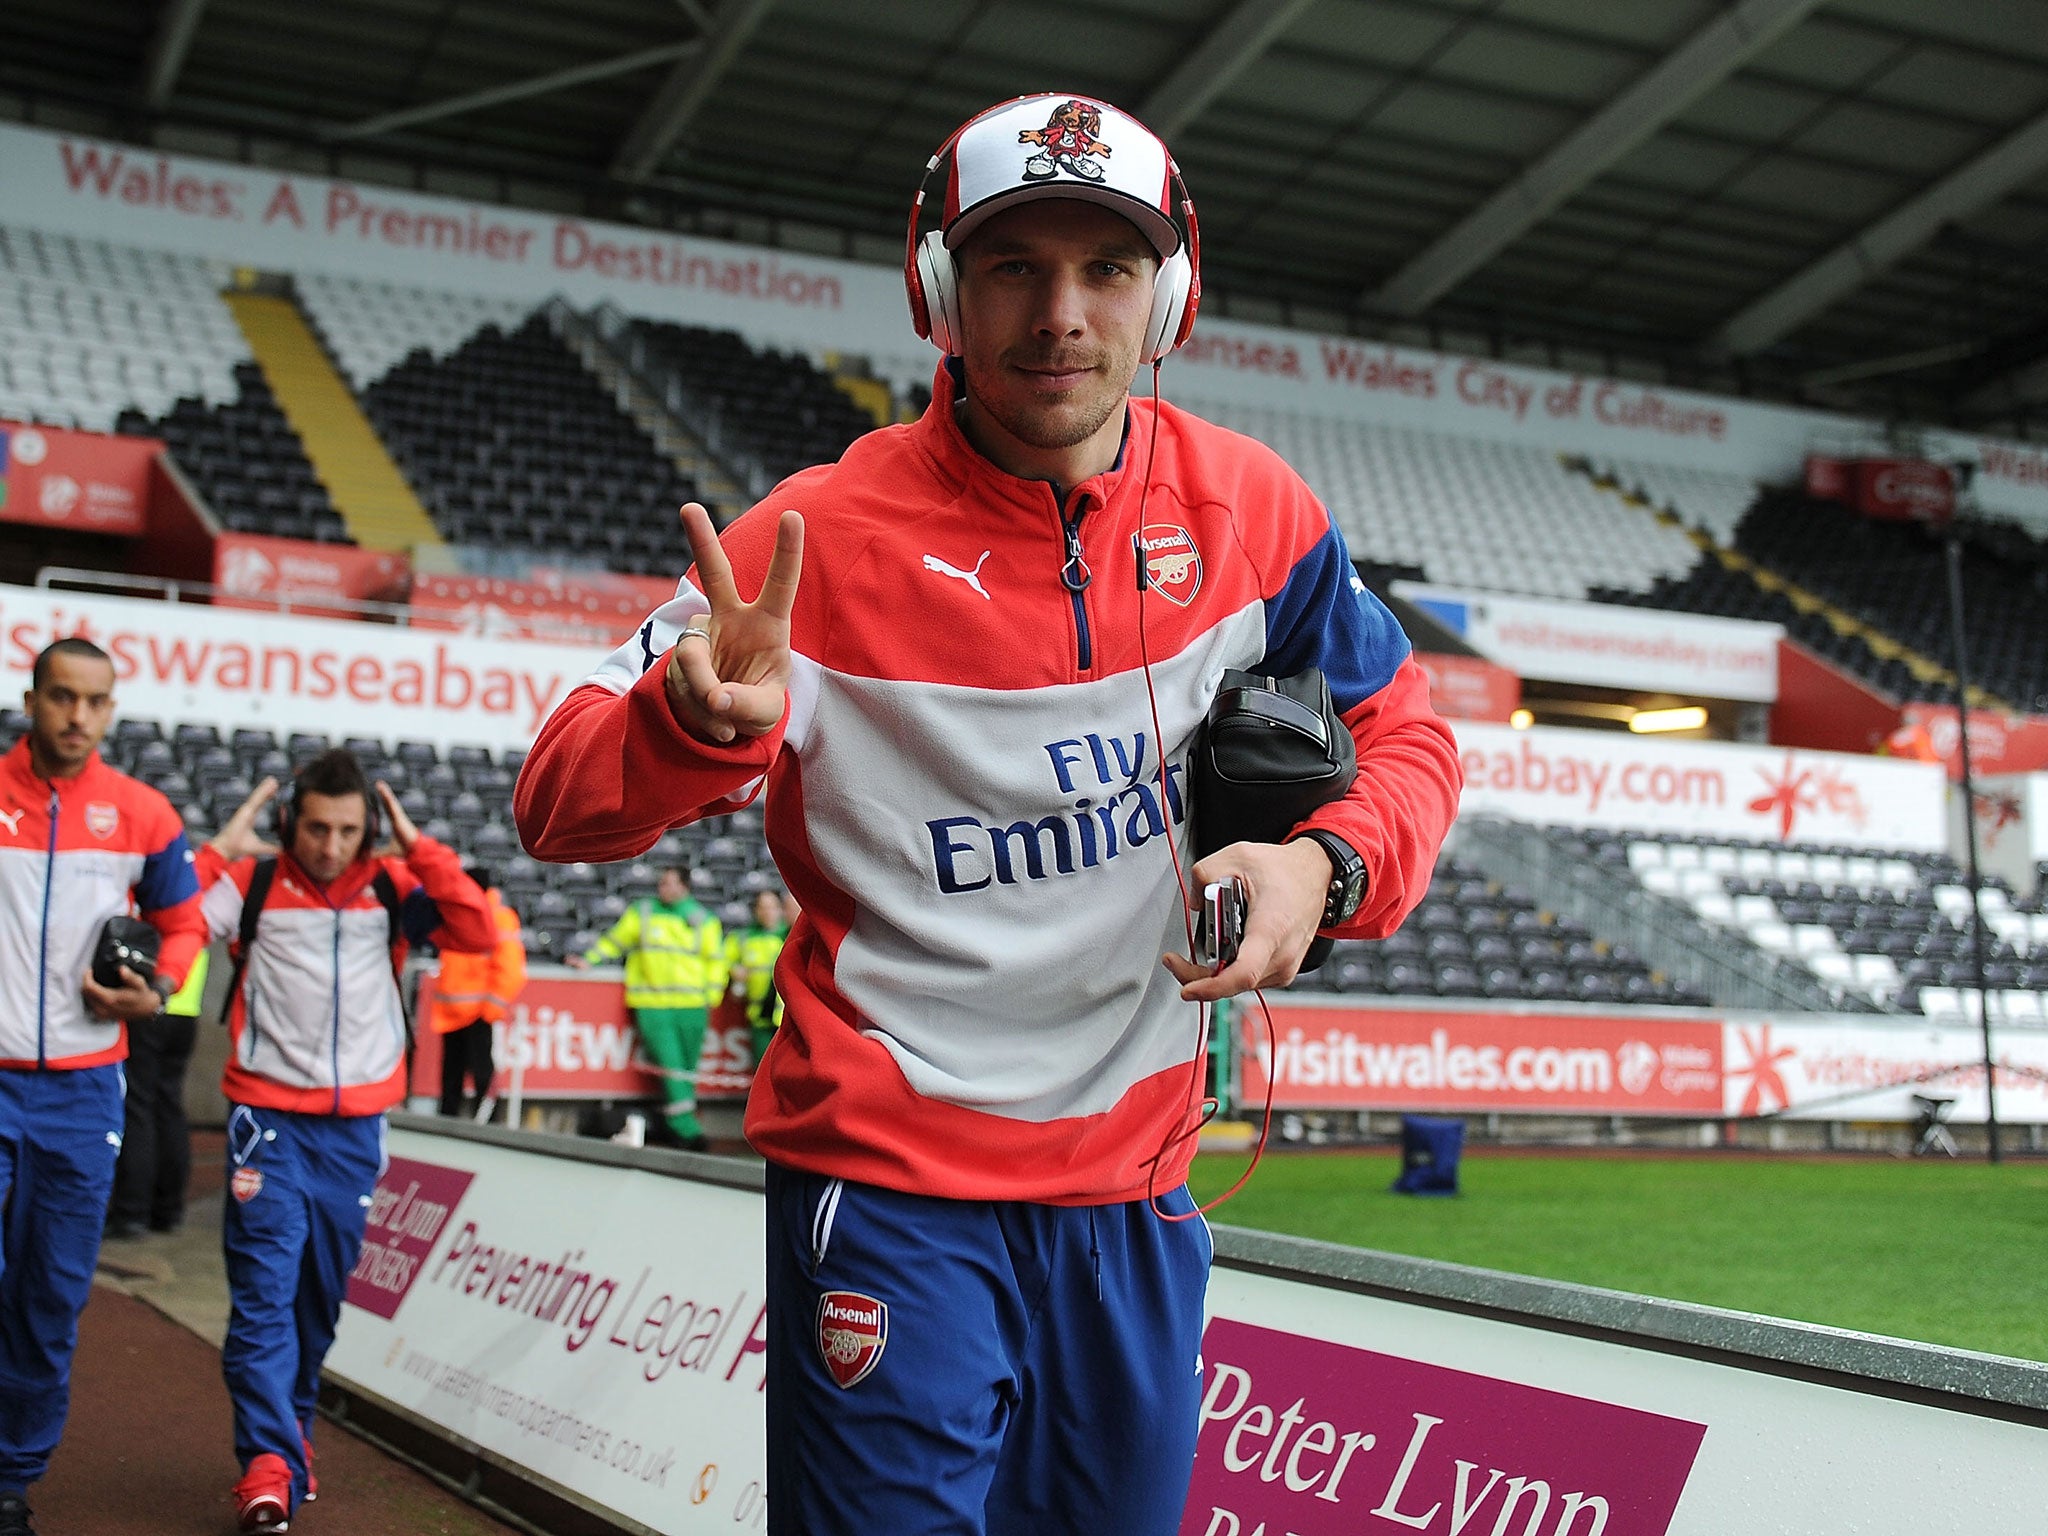 Podolski has not featured regularly for Arsenal this season